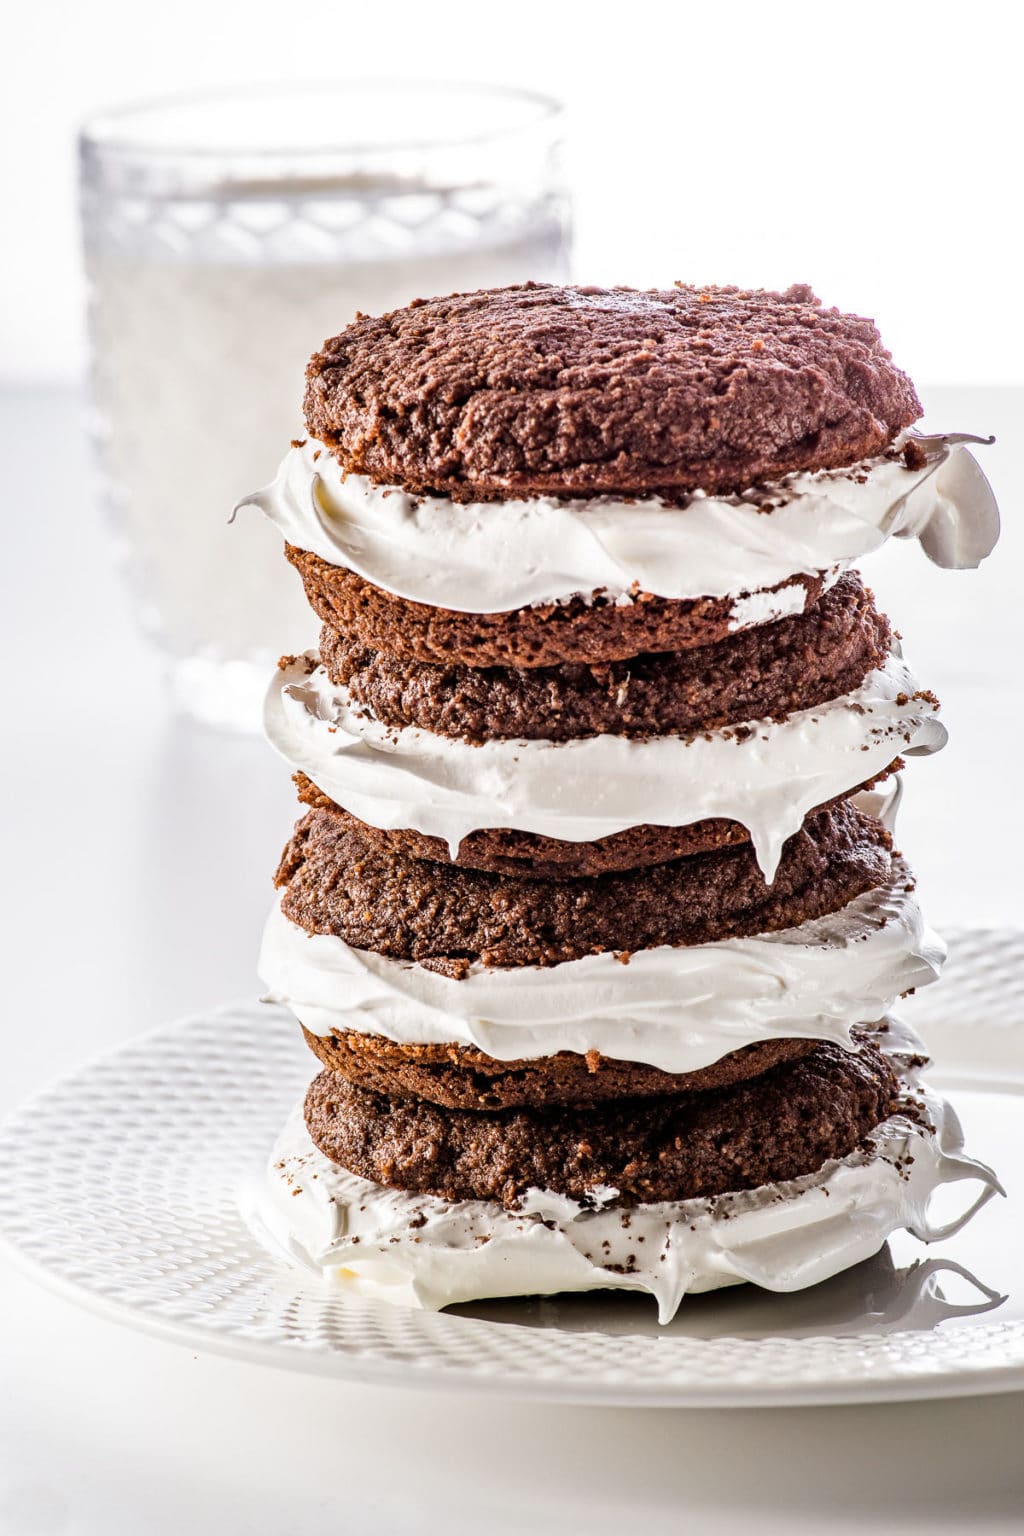 Stacked chocolate whoopie pies stuffed with marshmallow fluff on a white plate